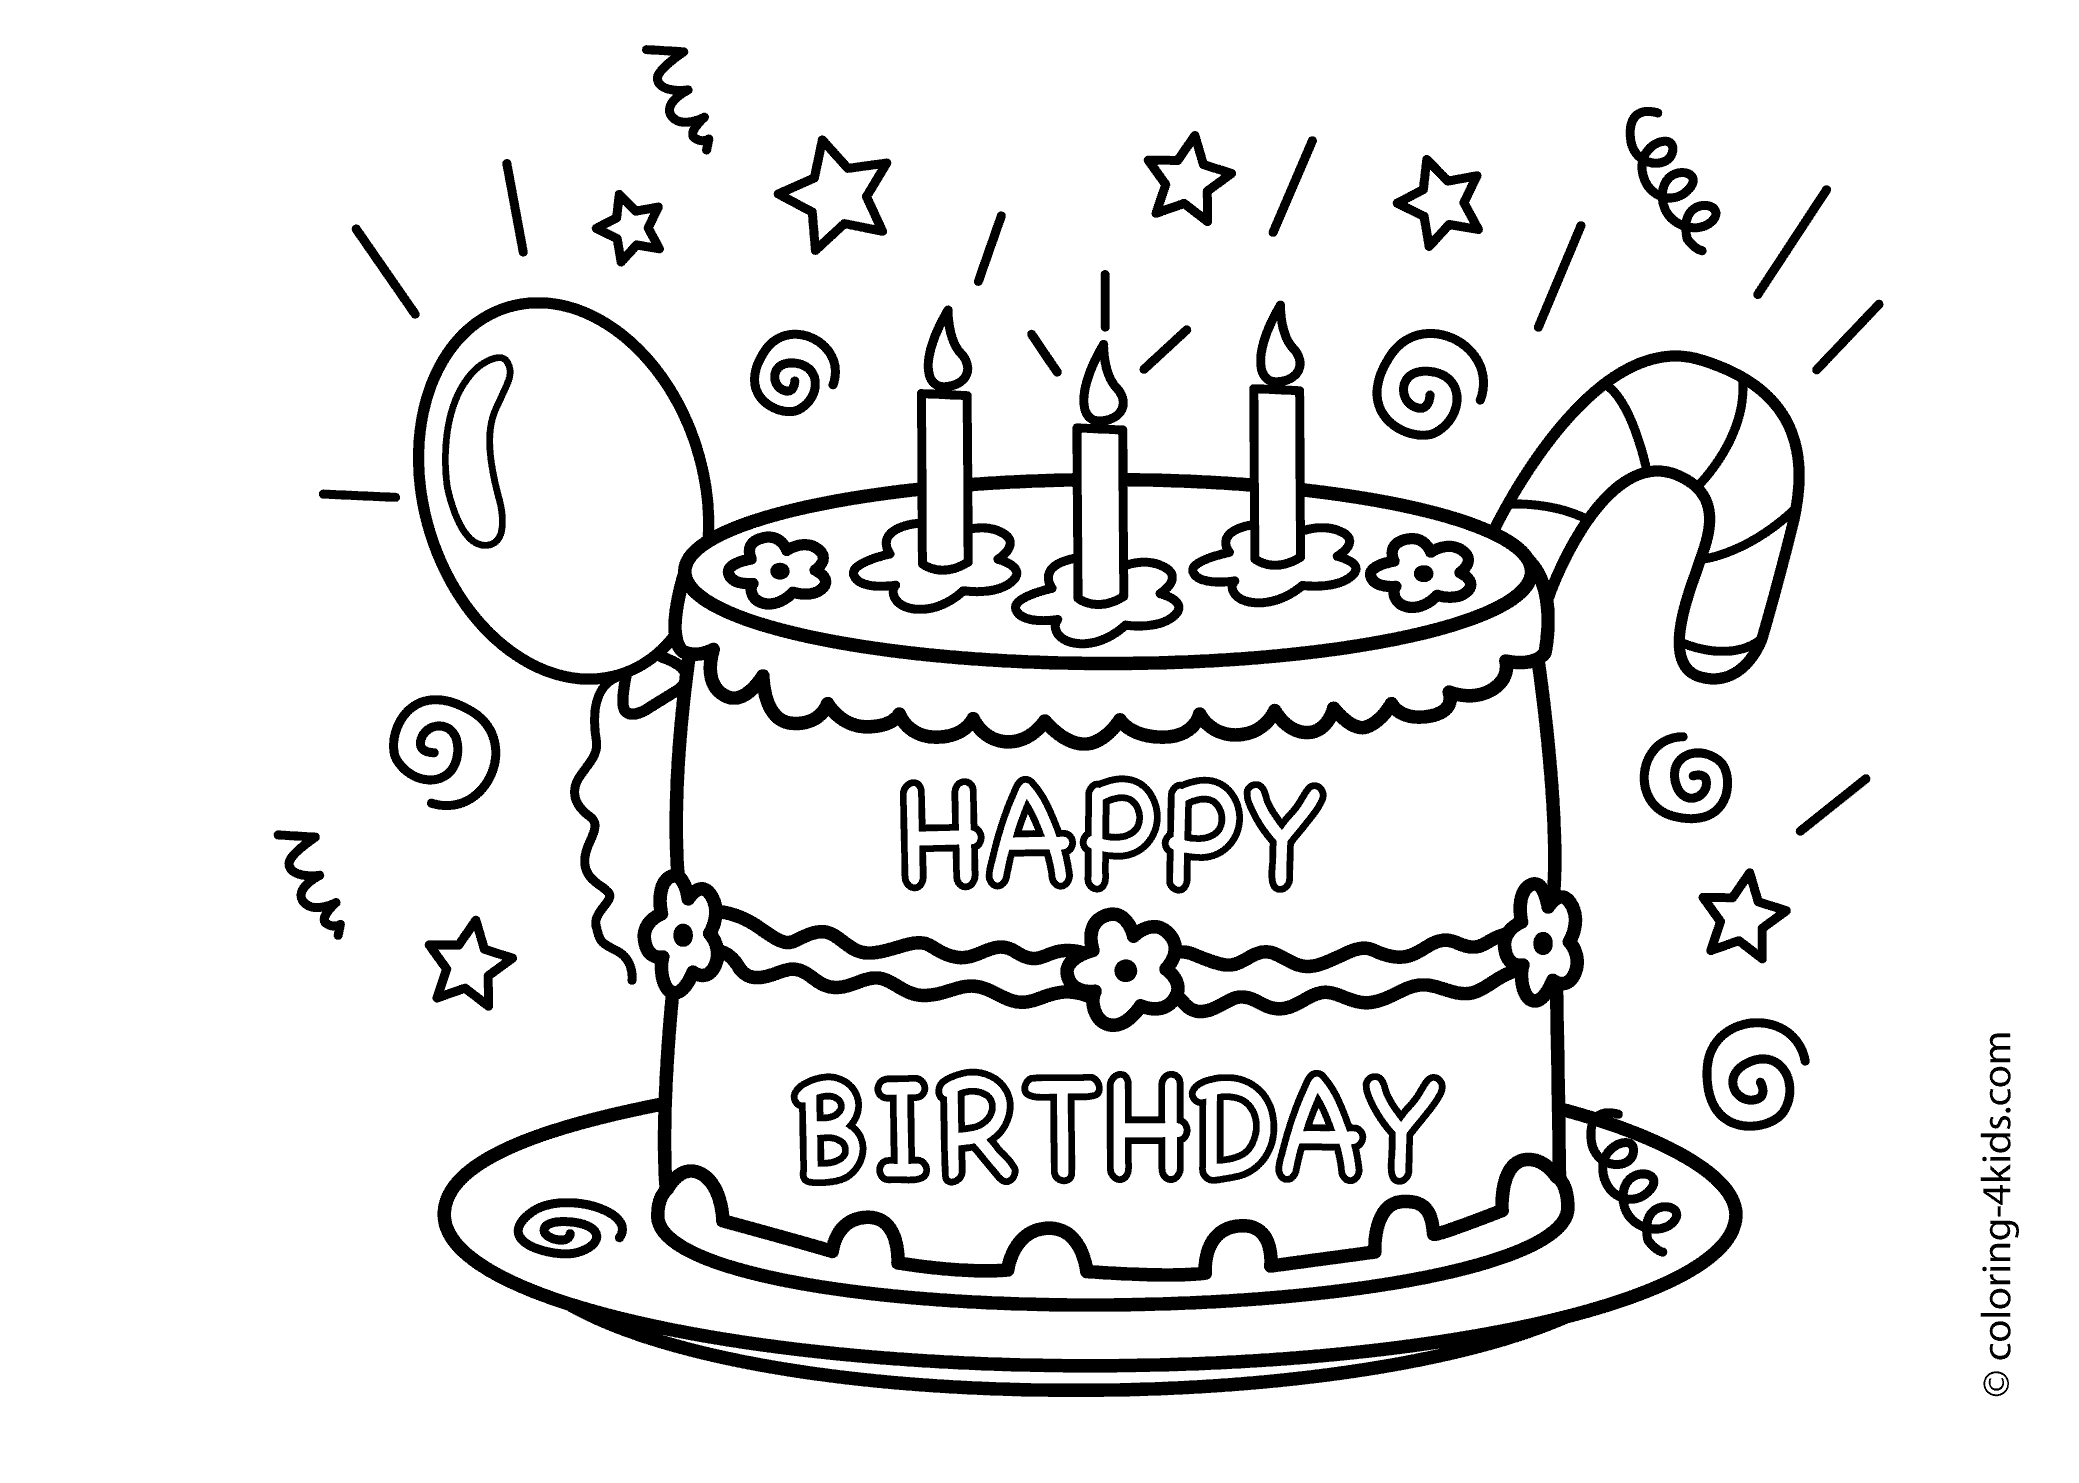 birthday-cake-coloring-pages-to-download-and-print-for-free